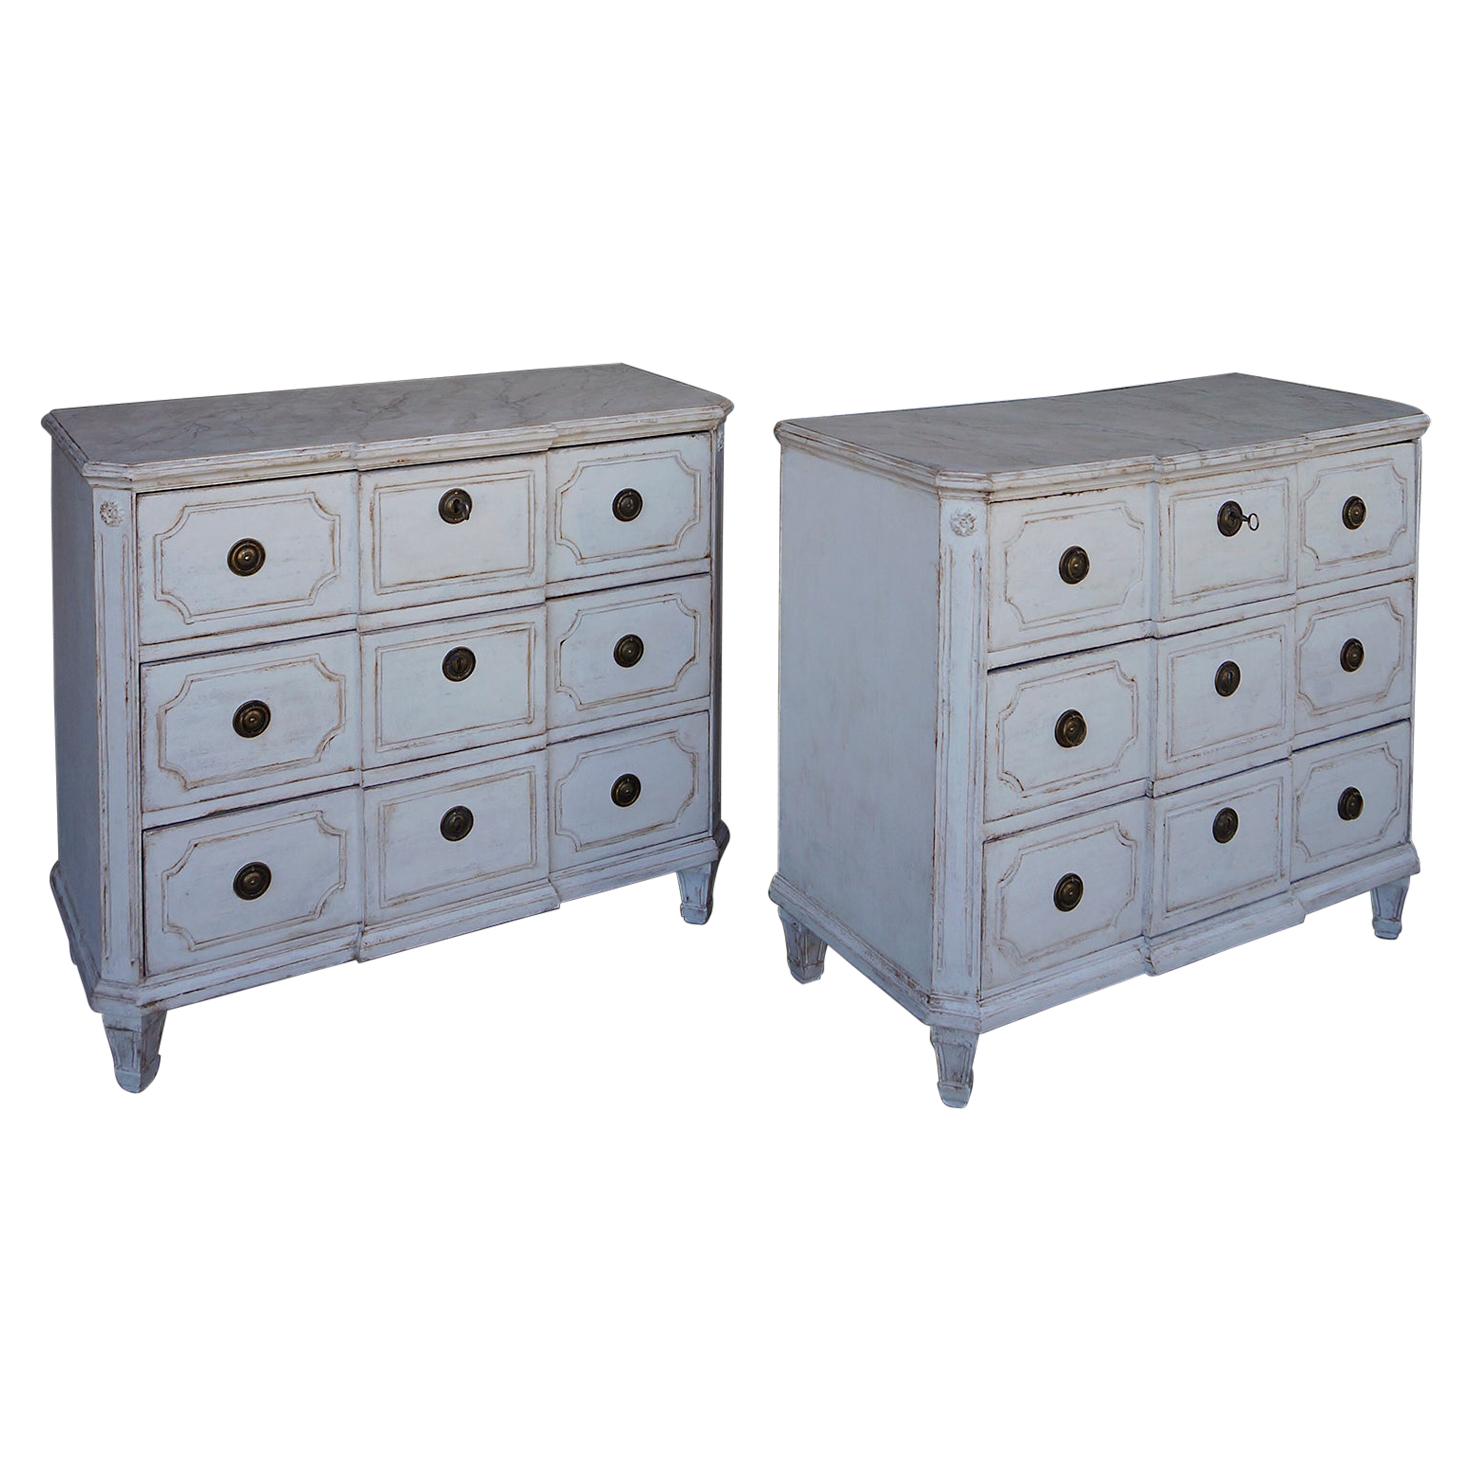 Pair of Swedish Breakfront Chests of Drawers